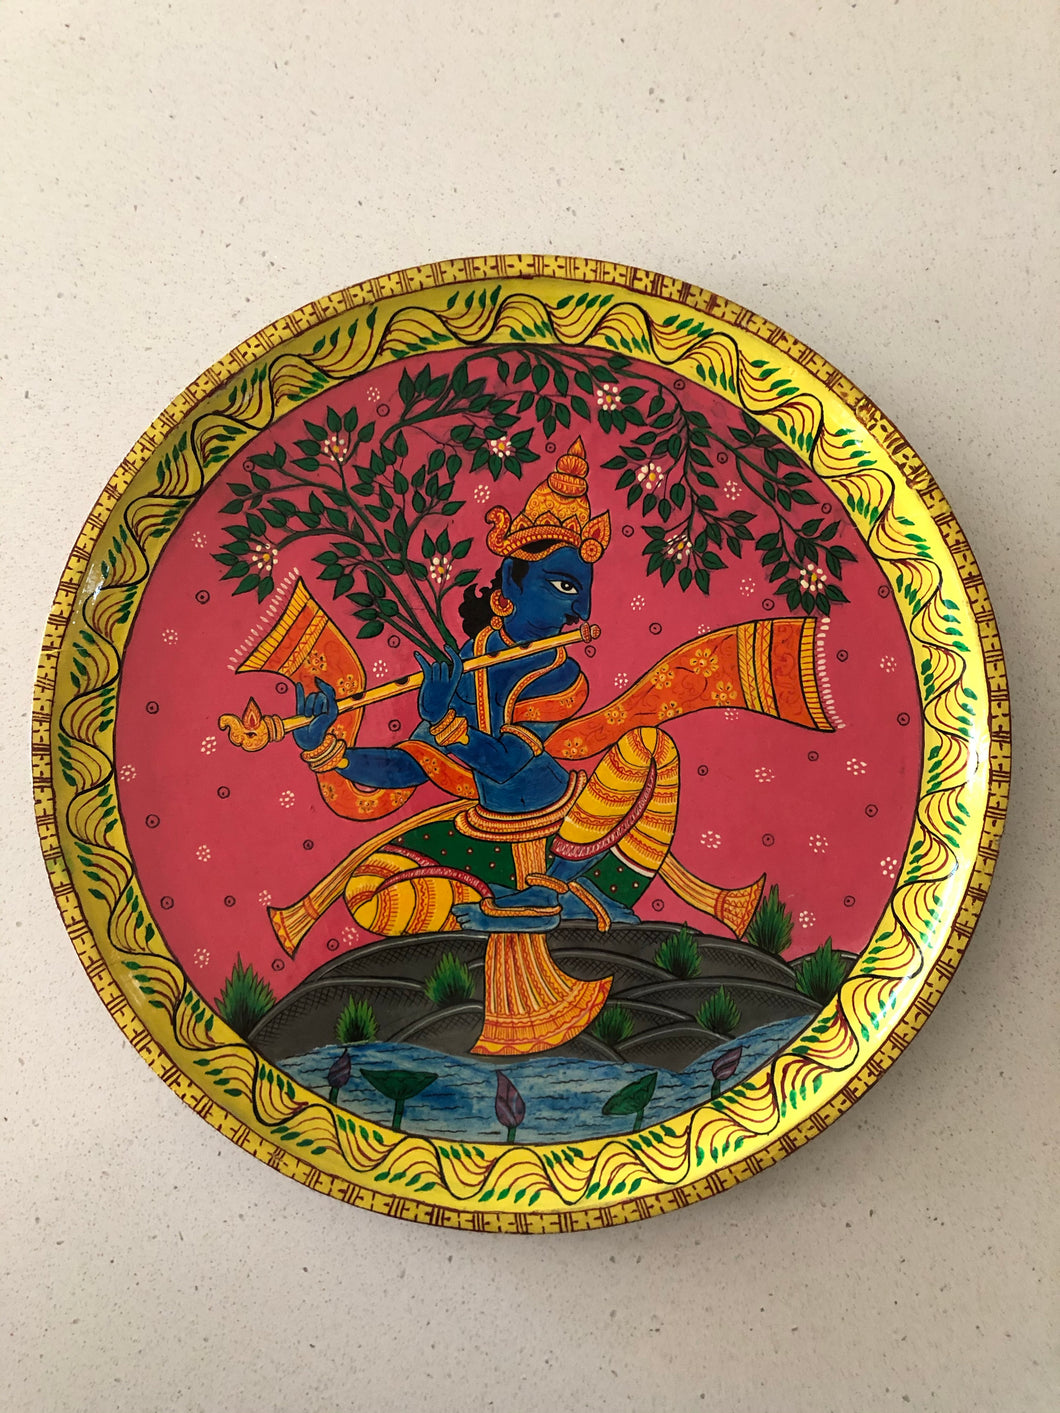 Handcrafted Hand painted Natural Solid Wood Wall Hanging Plate for home decor, wedding, housewarming, gift of Hermit Krishna in wood art